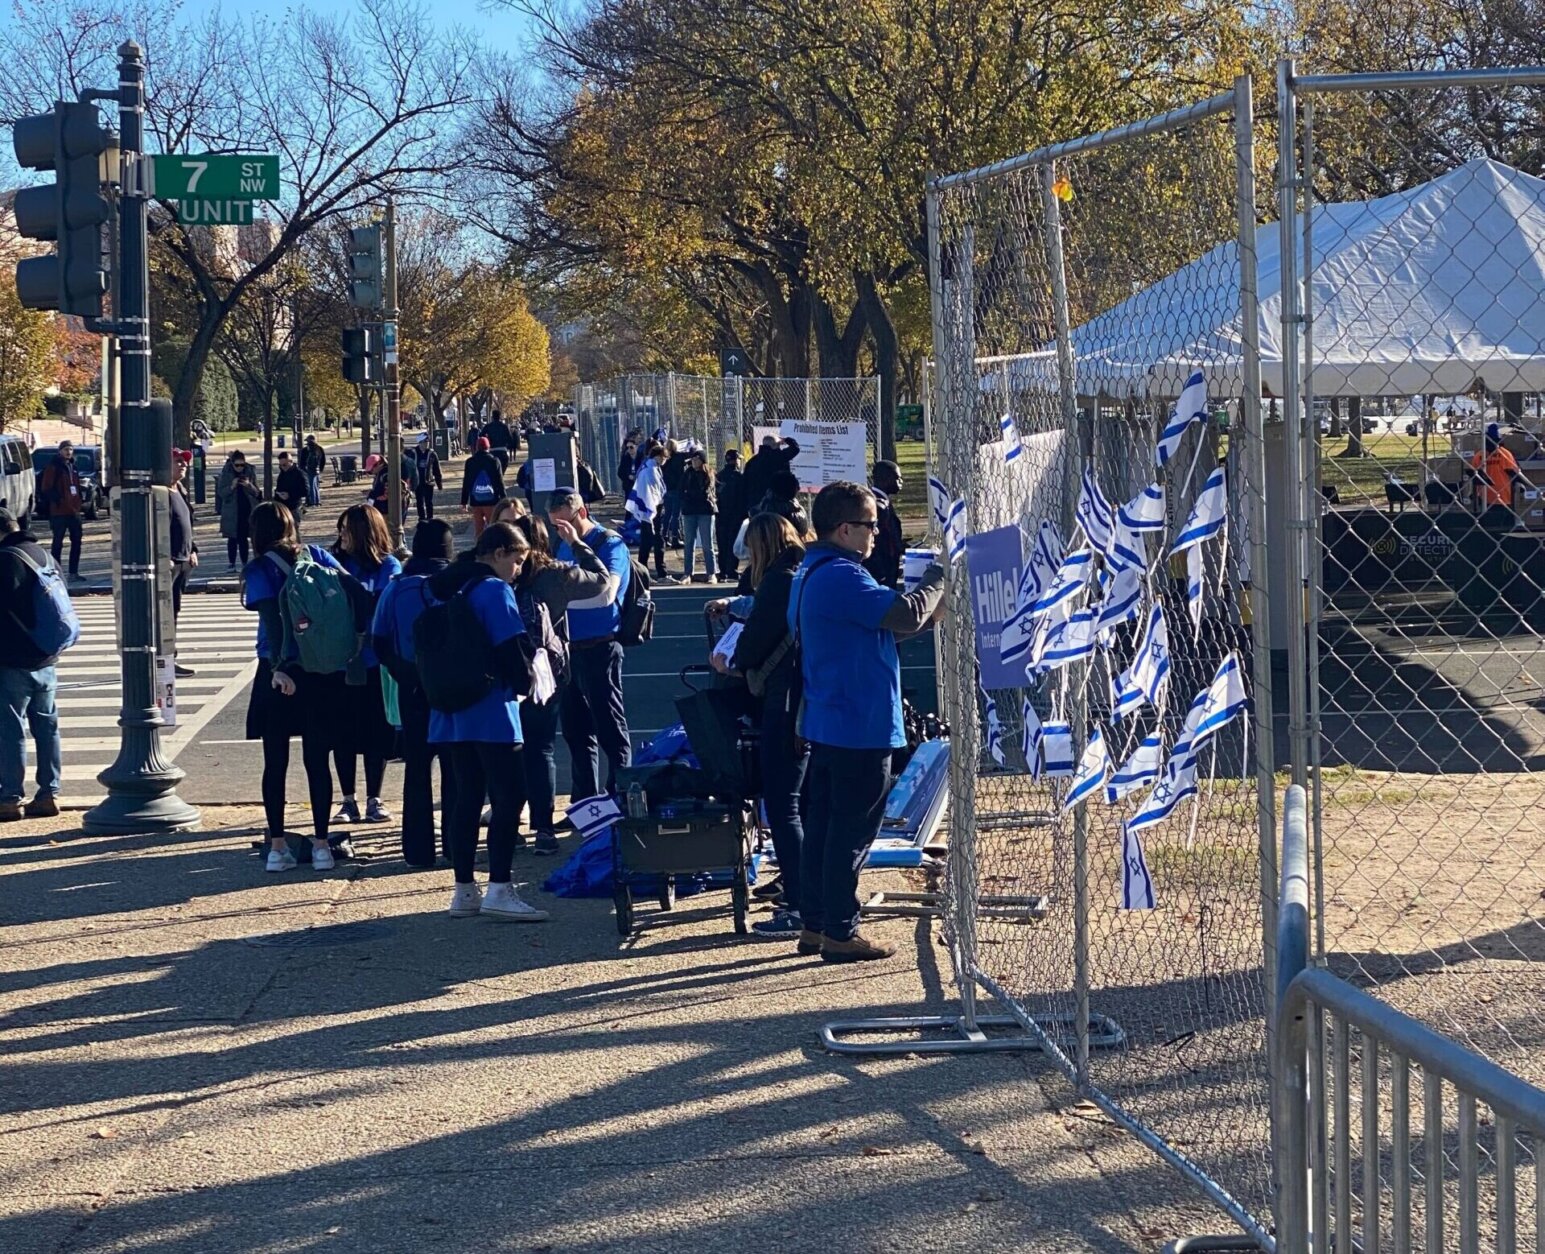 Gates outside the march are decorated with Israeli flags.